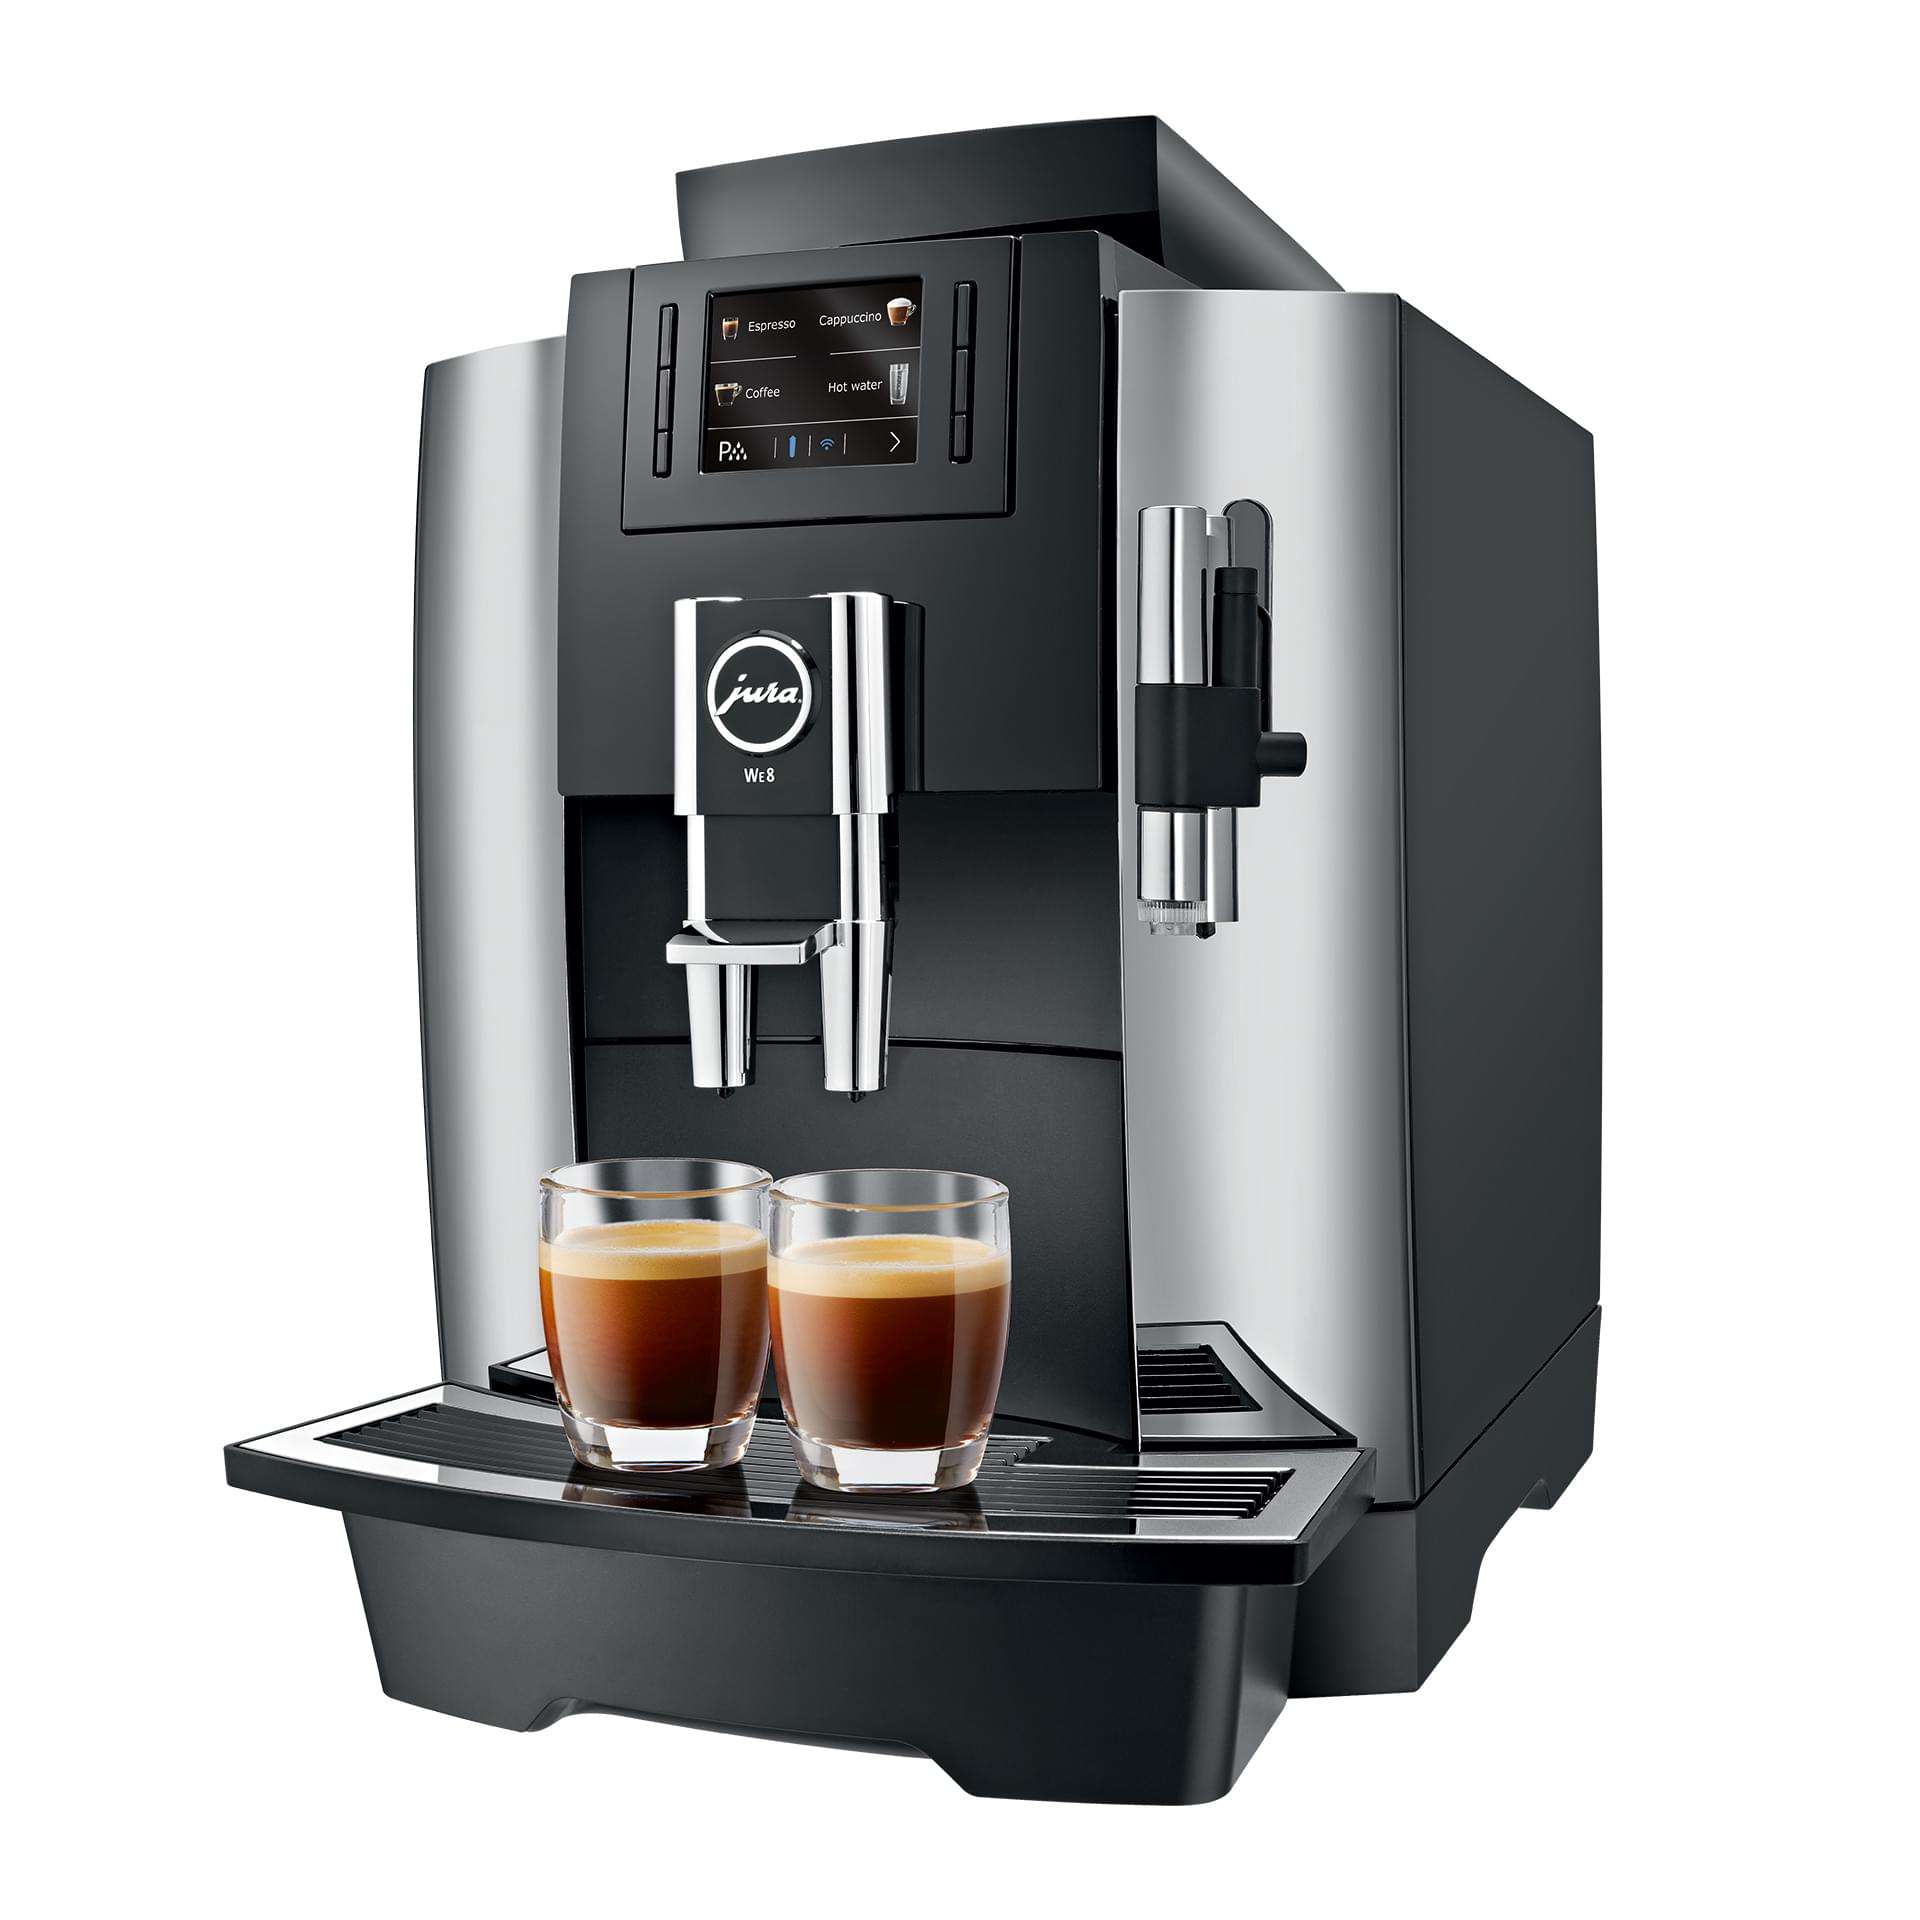 Jura WE8 Commercial Bean to Cup Coffee Machine